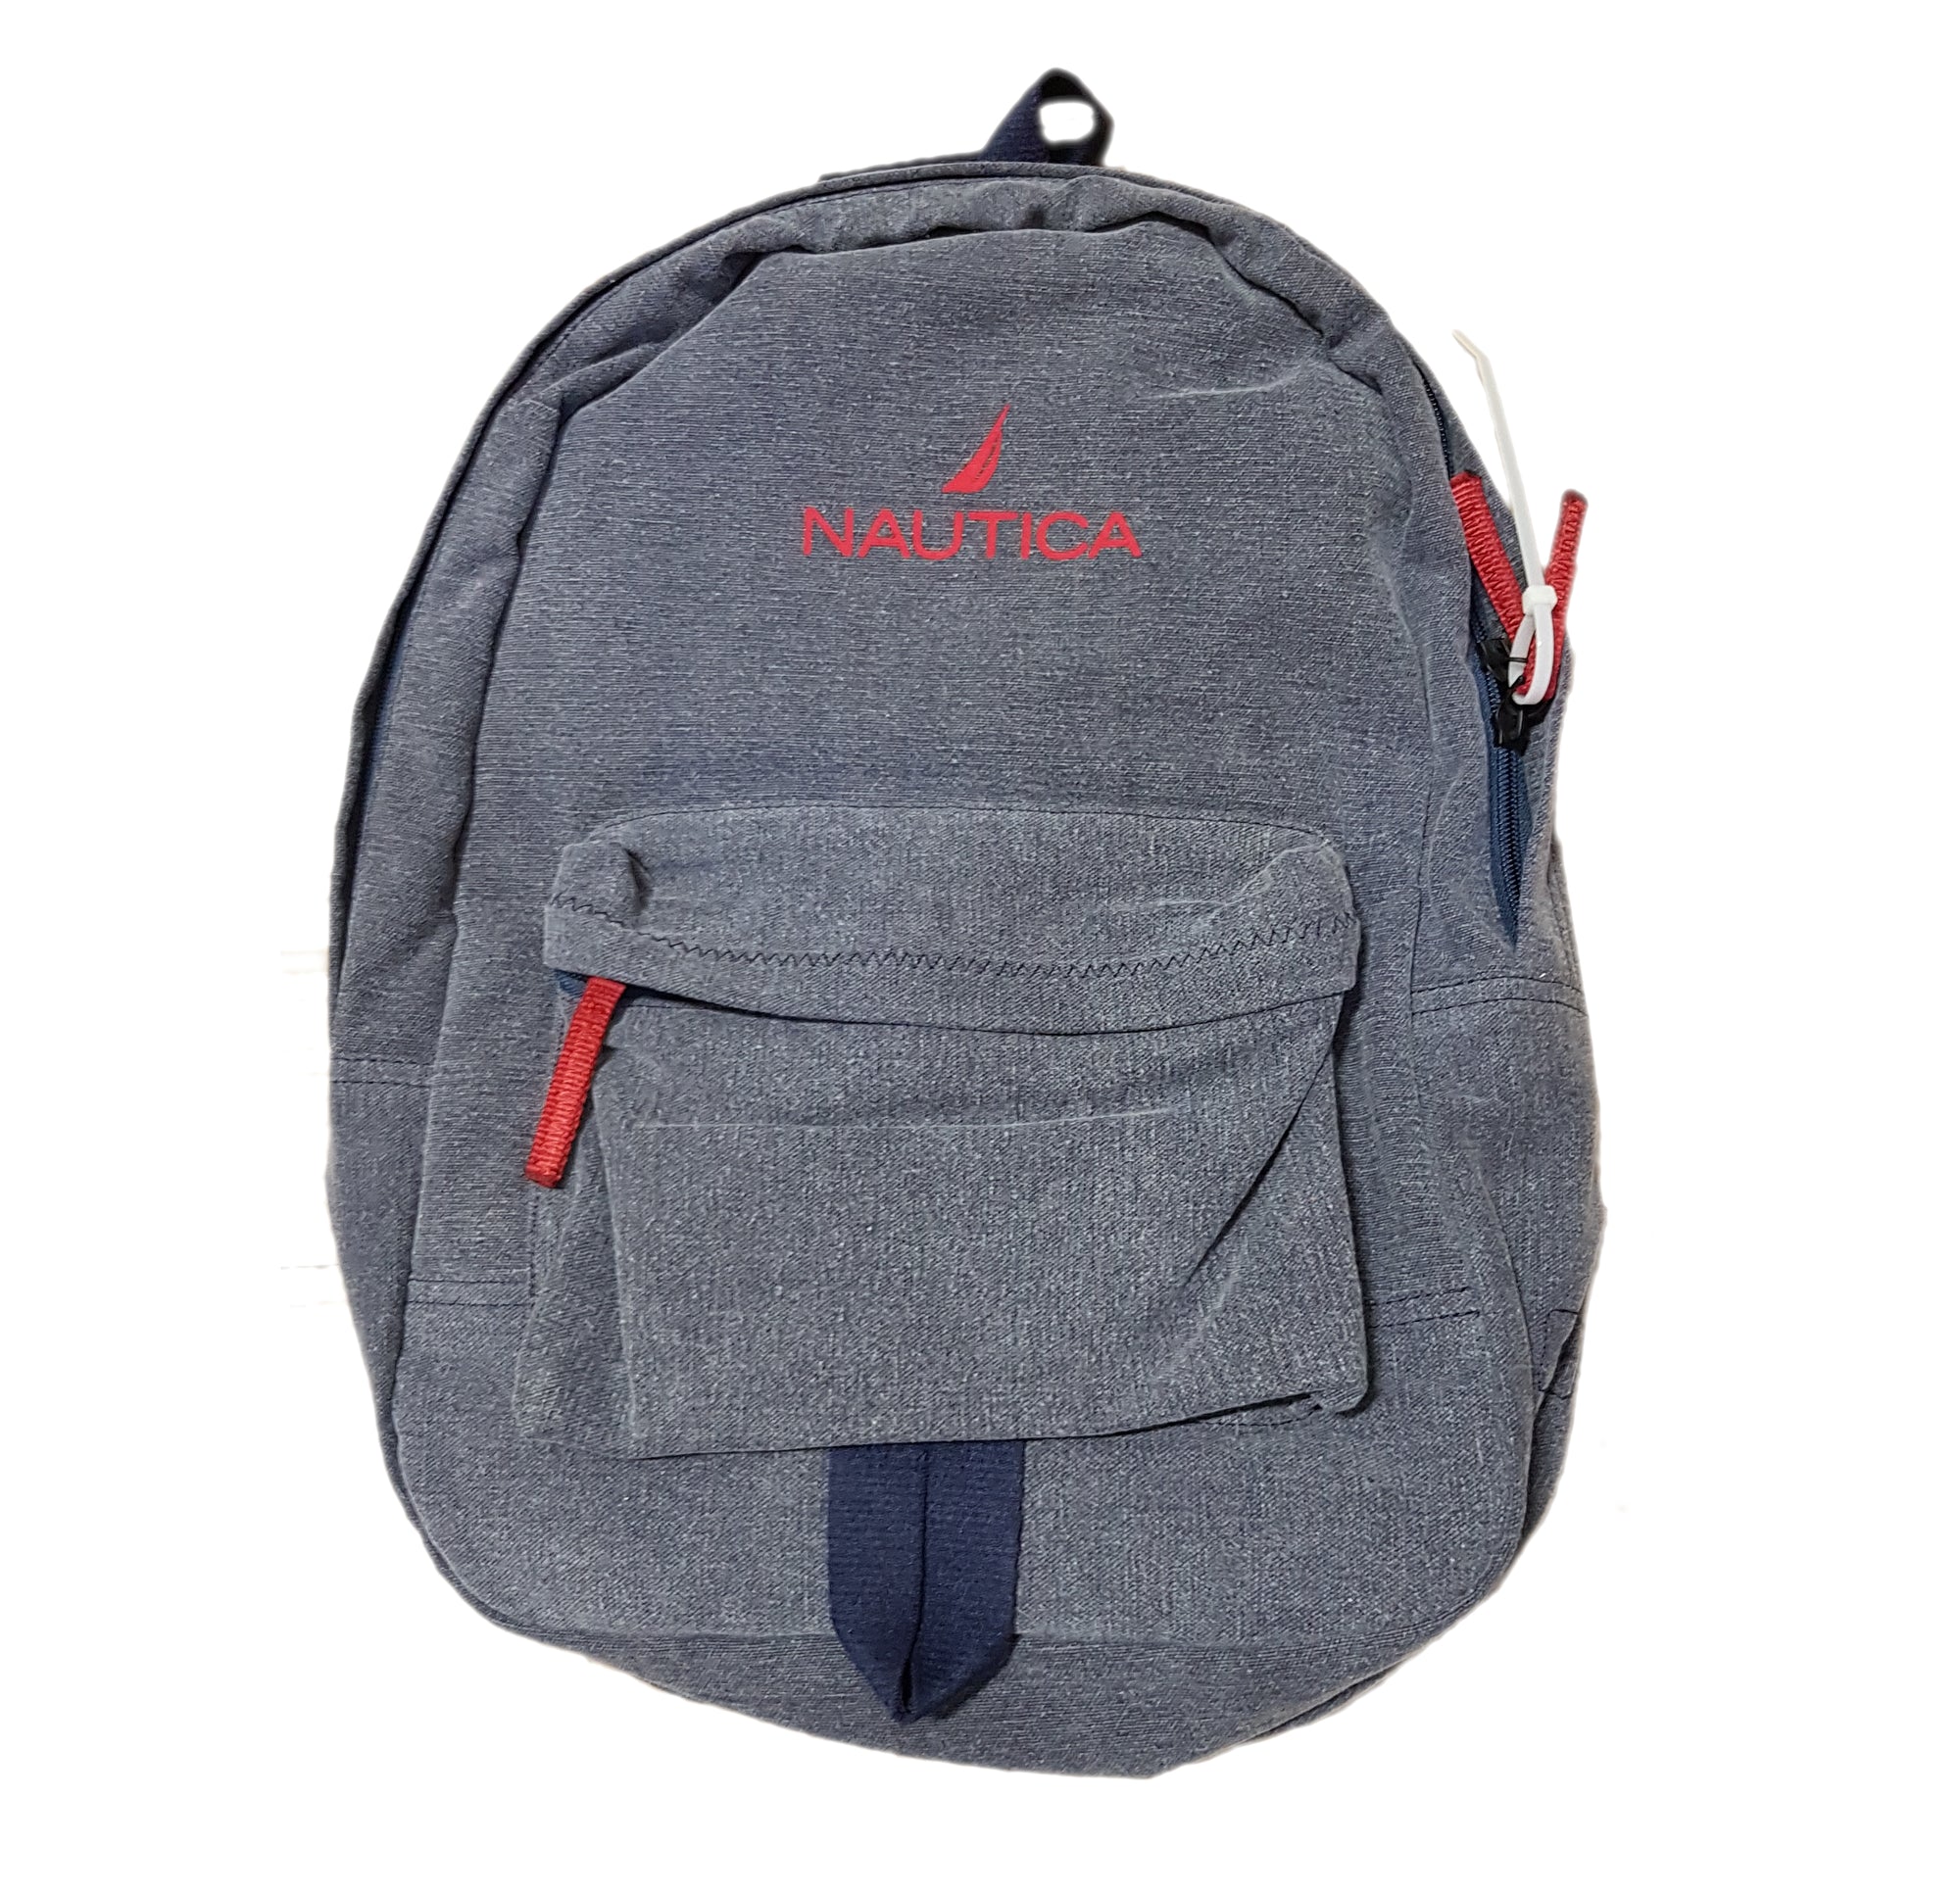 Nautica Water Resistant Cotton Backpack (Navy/Red)